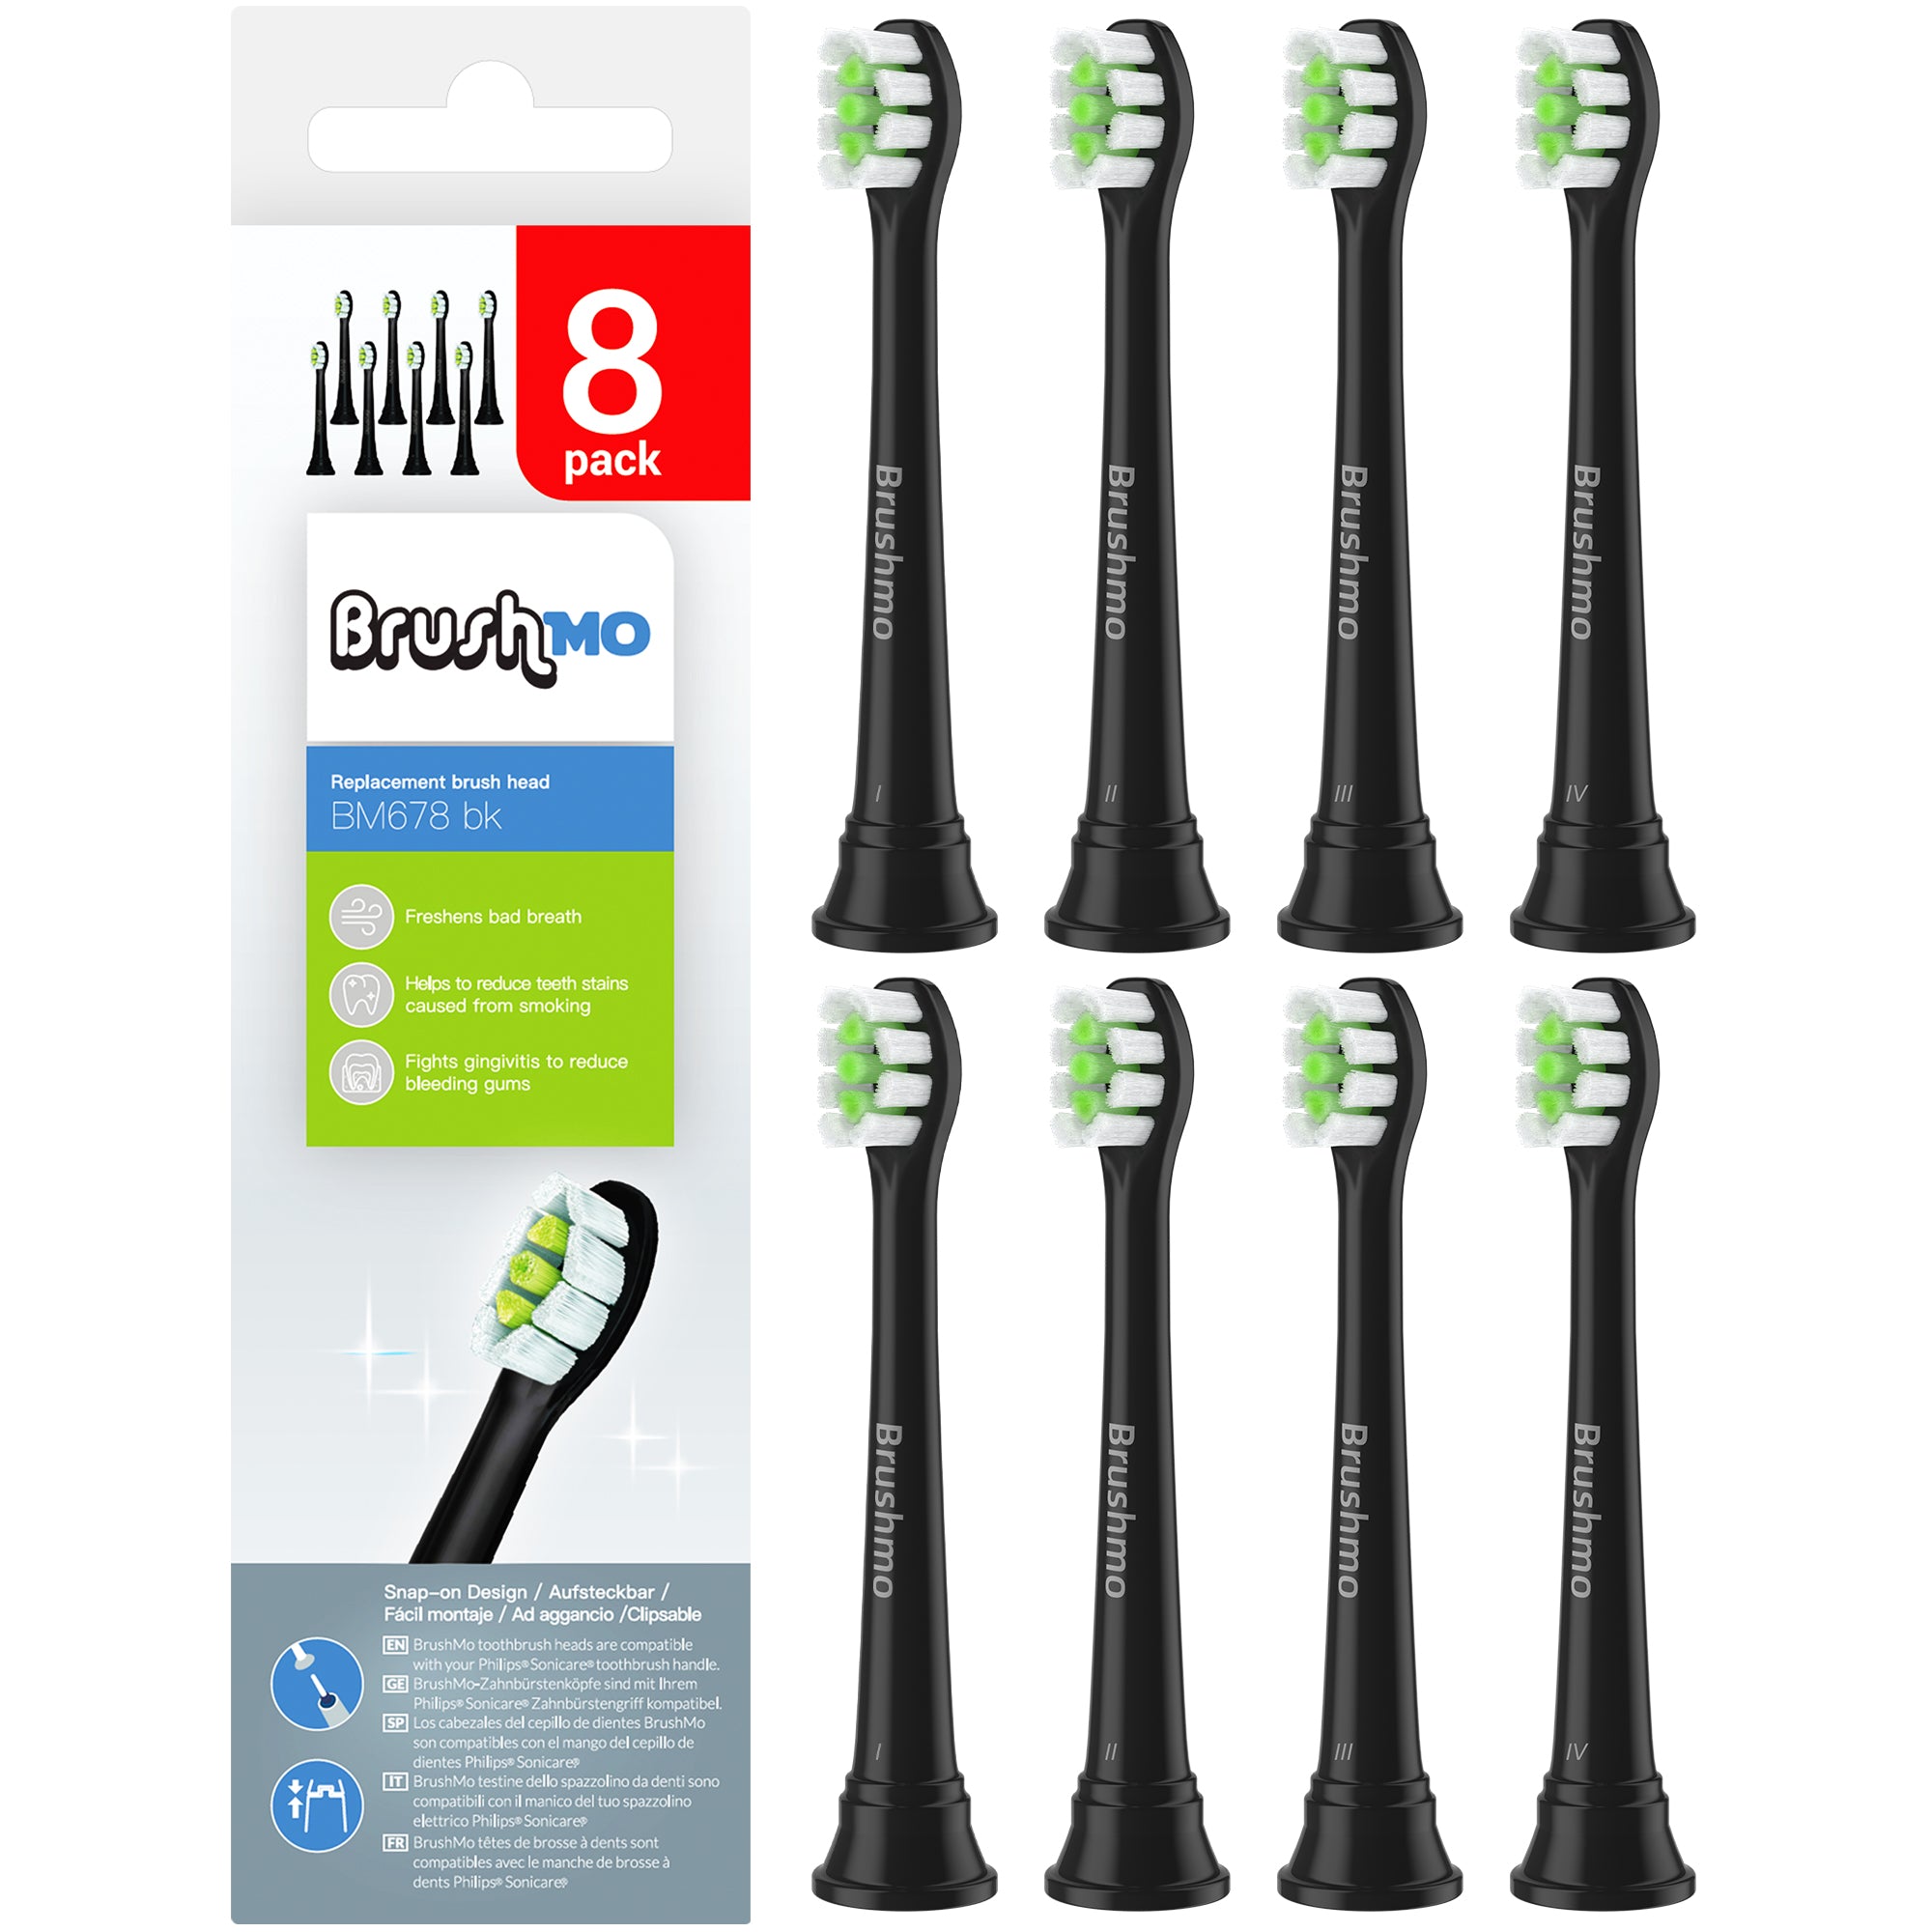 Replacement toothbrush heads for Philips Sonicare DiamondClean HX6072, Black, 8 pack compact